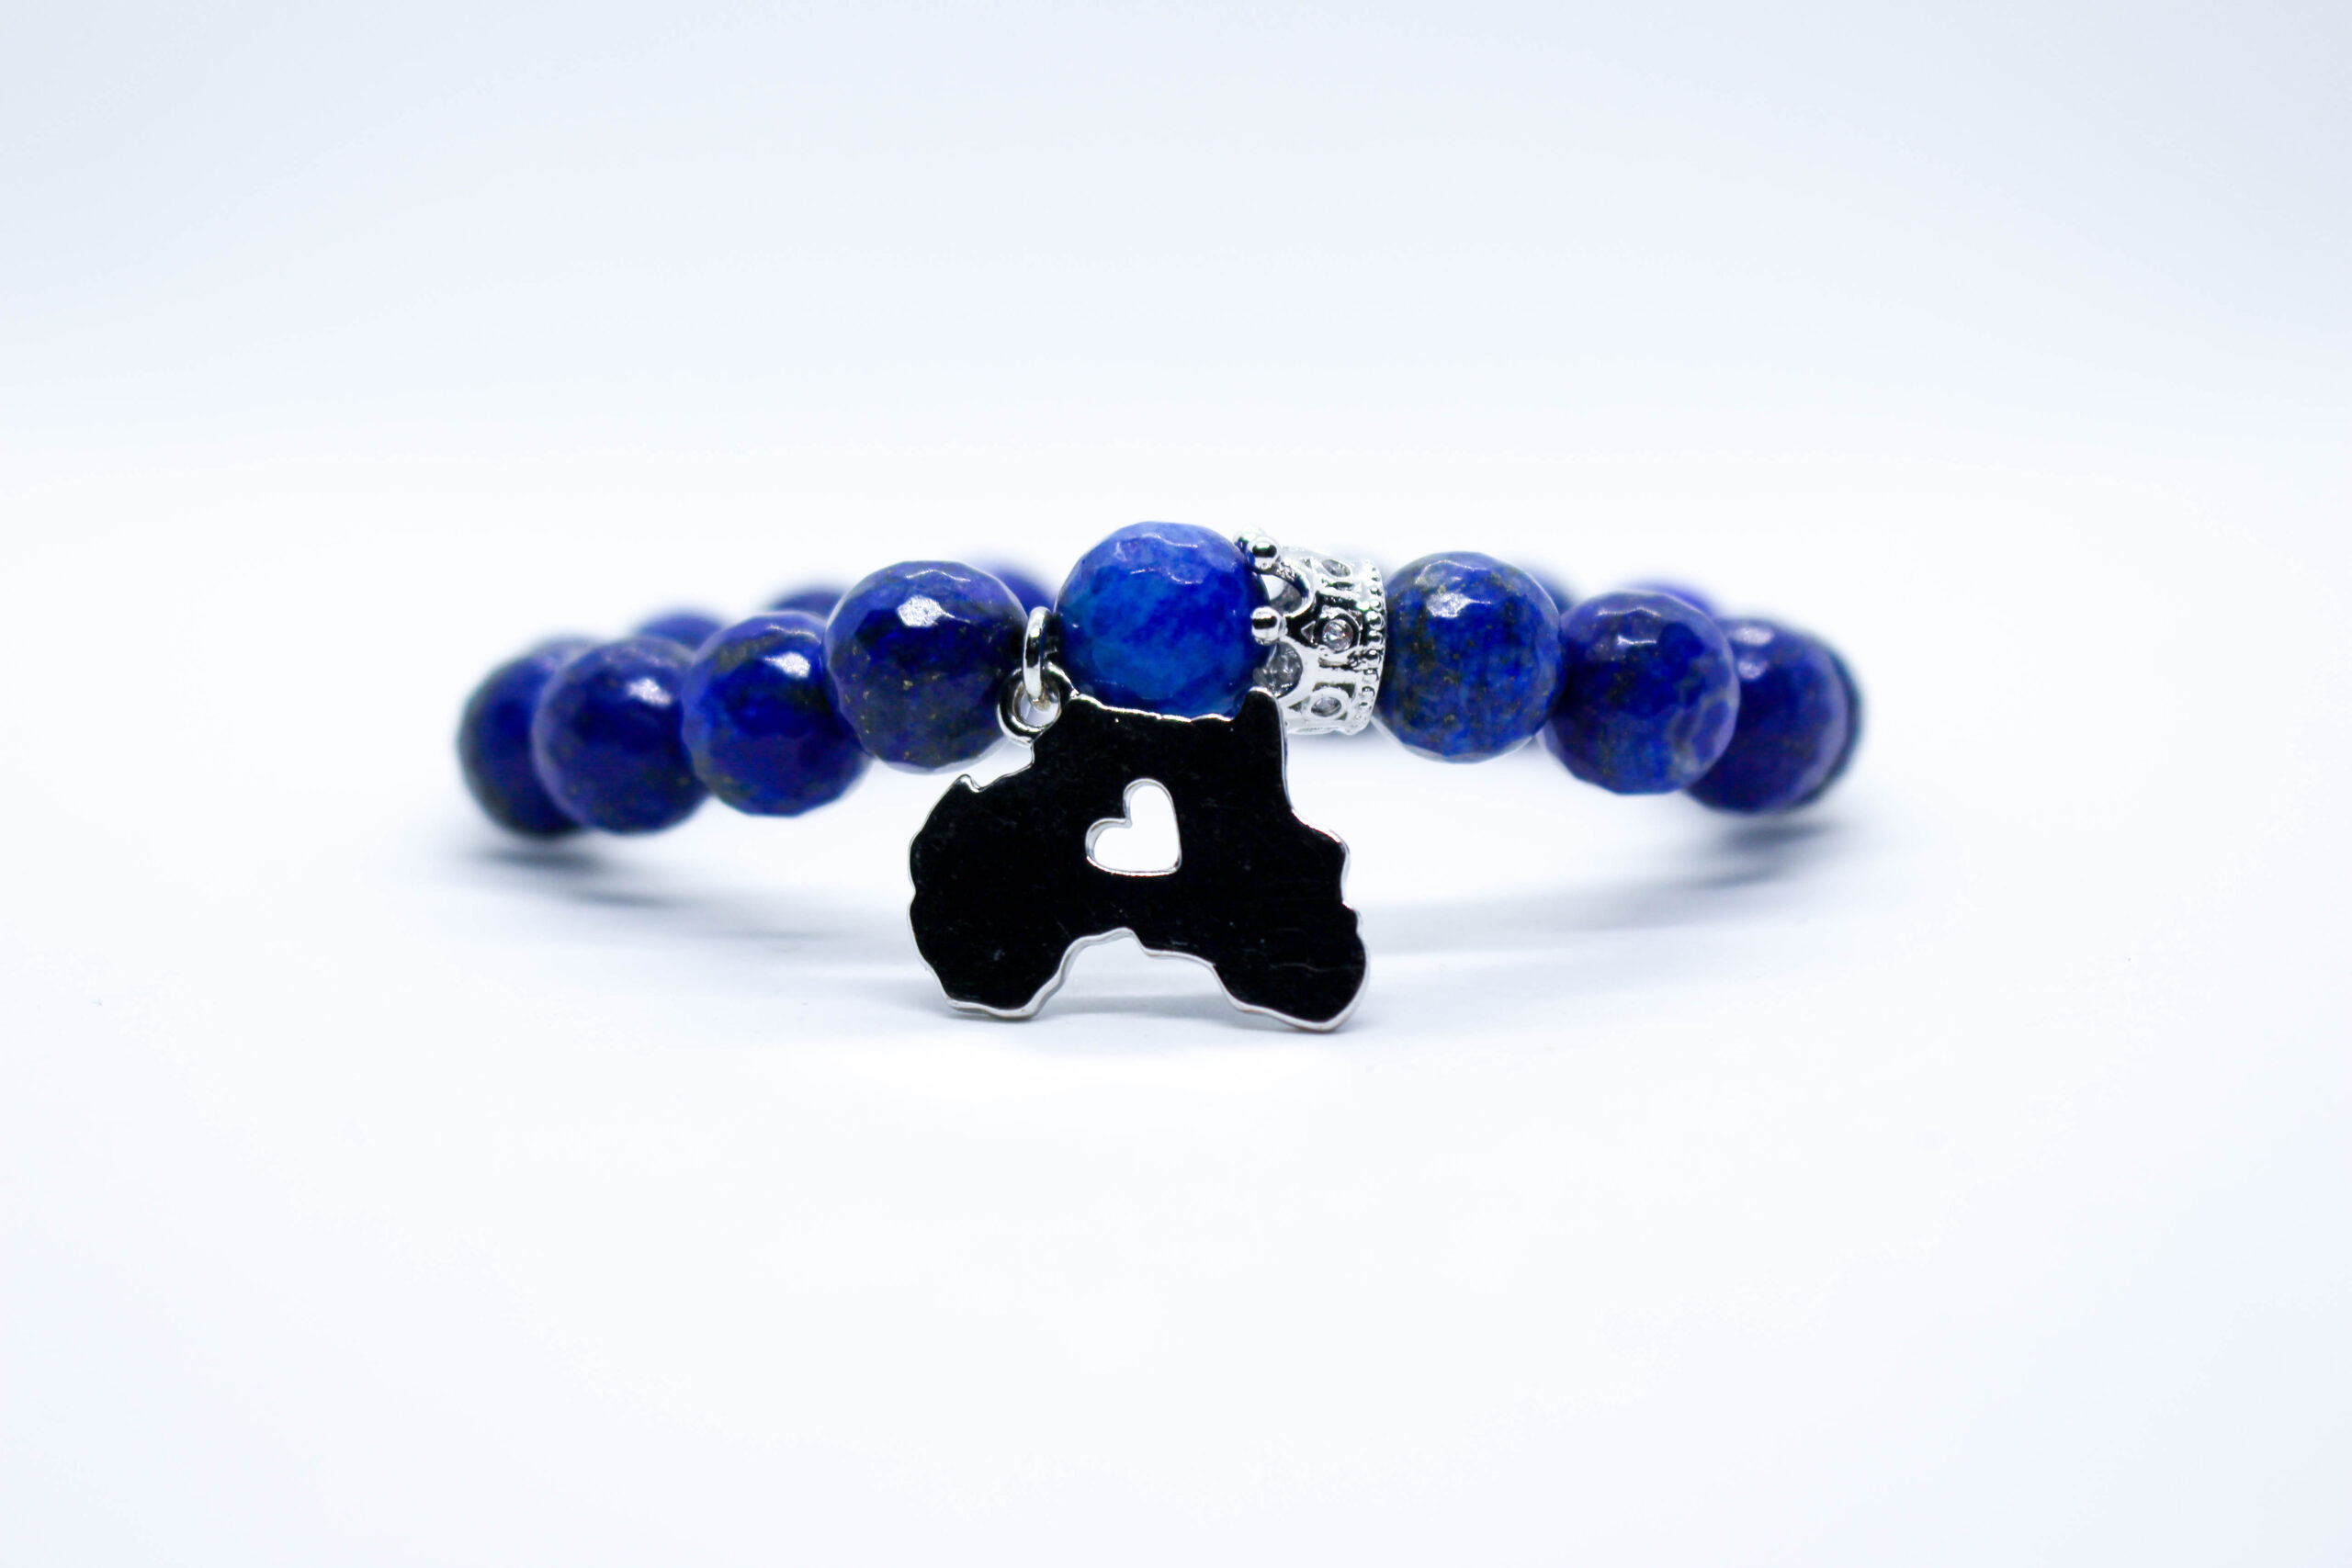 Xxx Sex Collage Sexxx - Heart of Africa Crowned Bracelet (Faceted Lapis Lazuli Crystal) 10mm Beads  | RockYourLocs